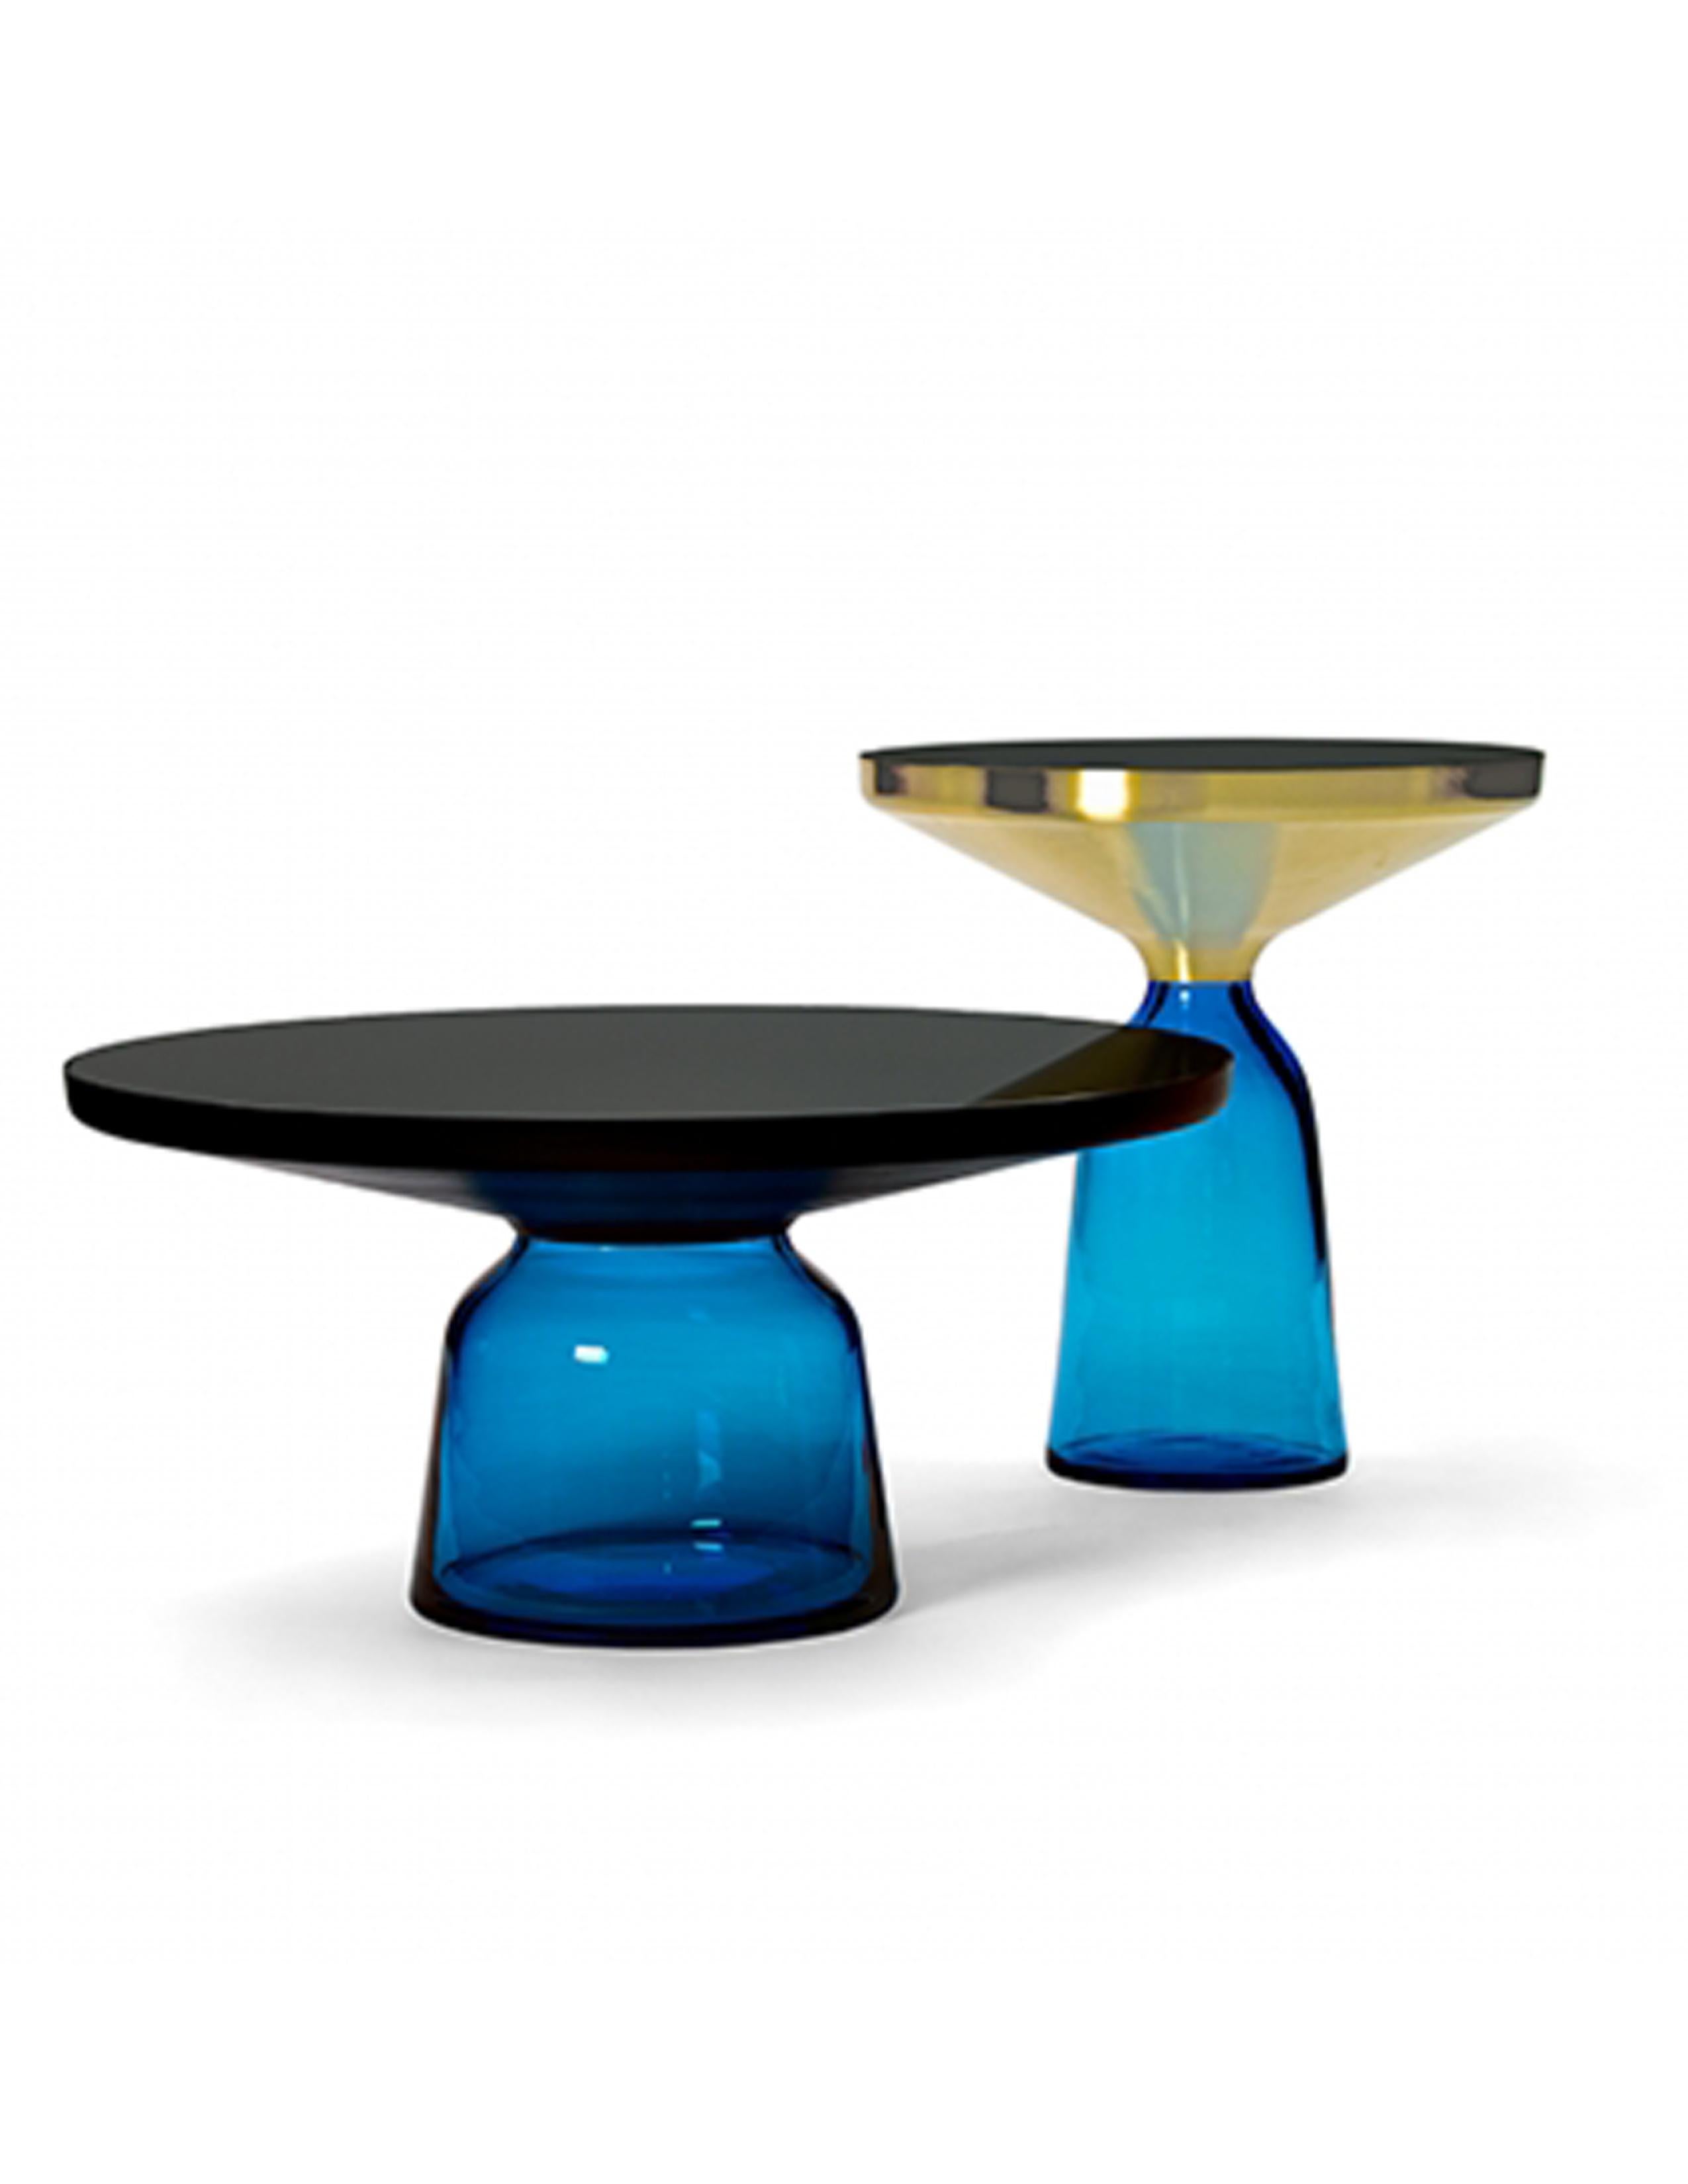 Hand-Crafted ClassiCon Bell Side Table in Brass and Sapphire Blue by Sebastian Herkner